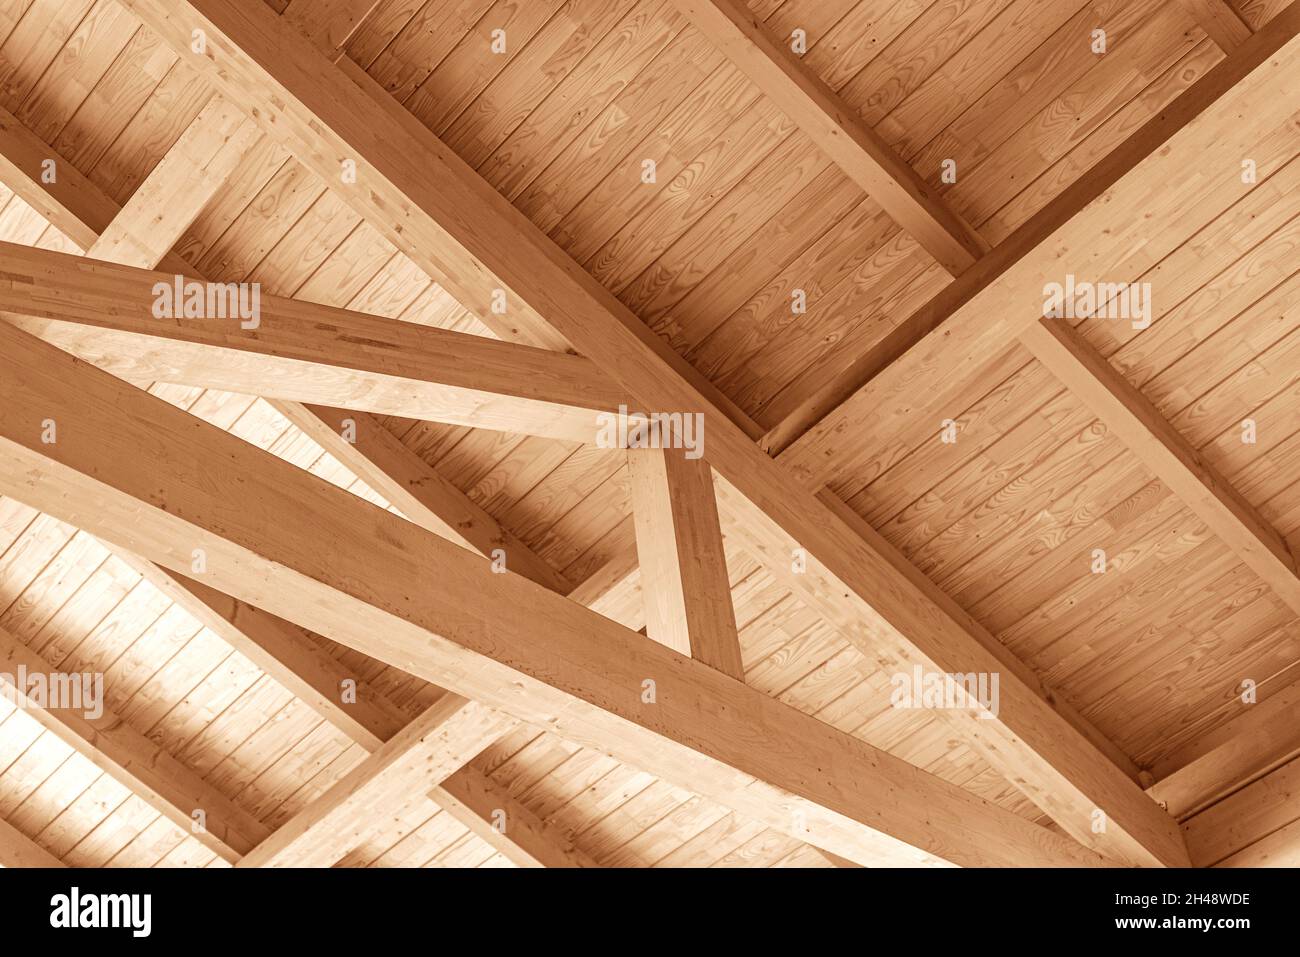 Wooden roof construction. Overlapping a wooden house. Stock Photo